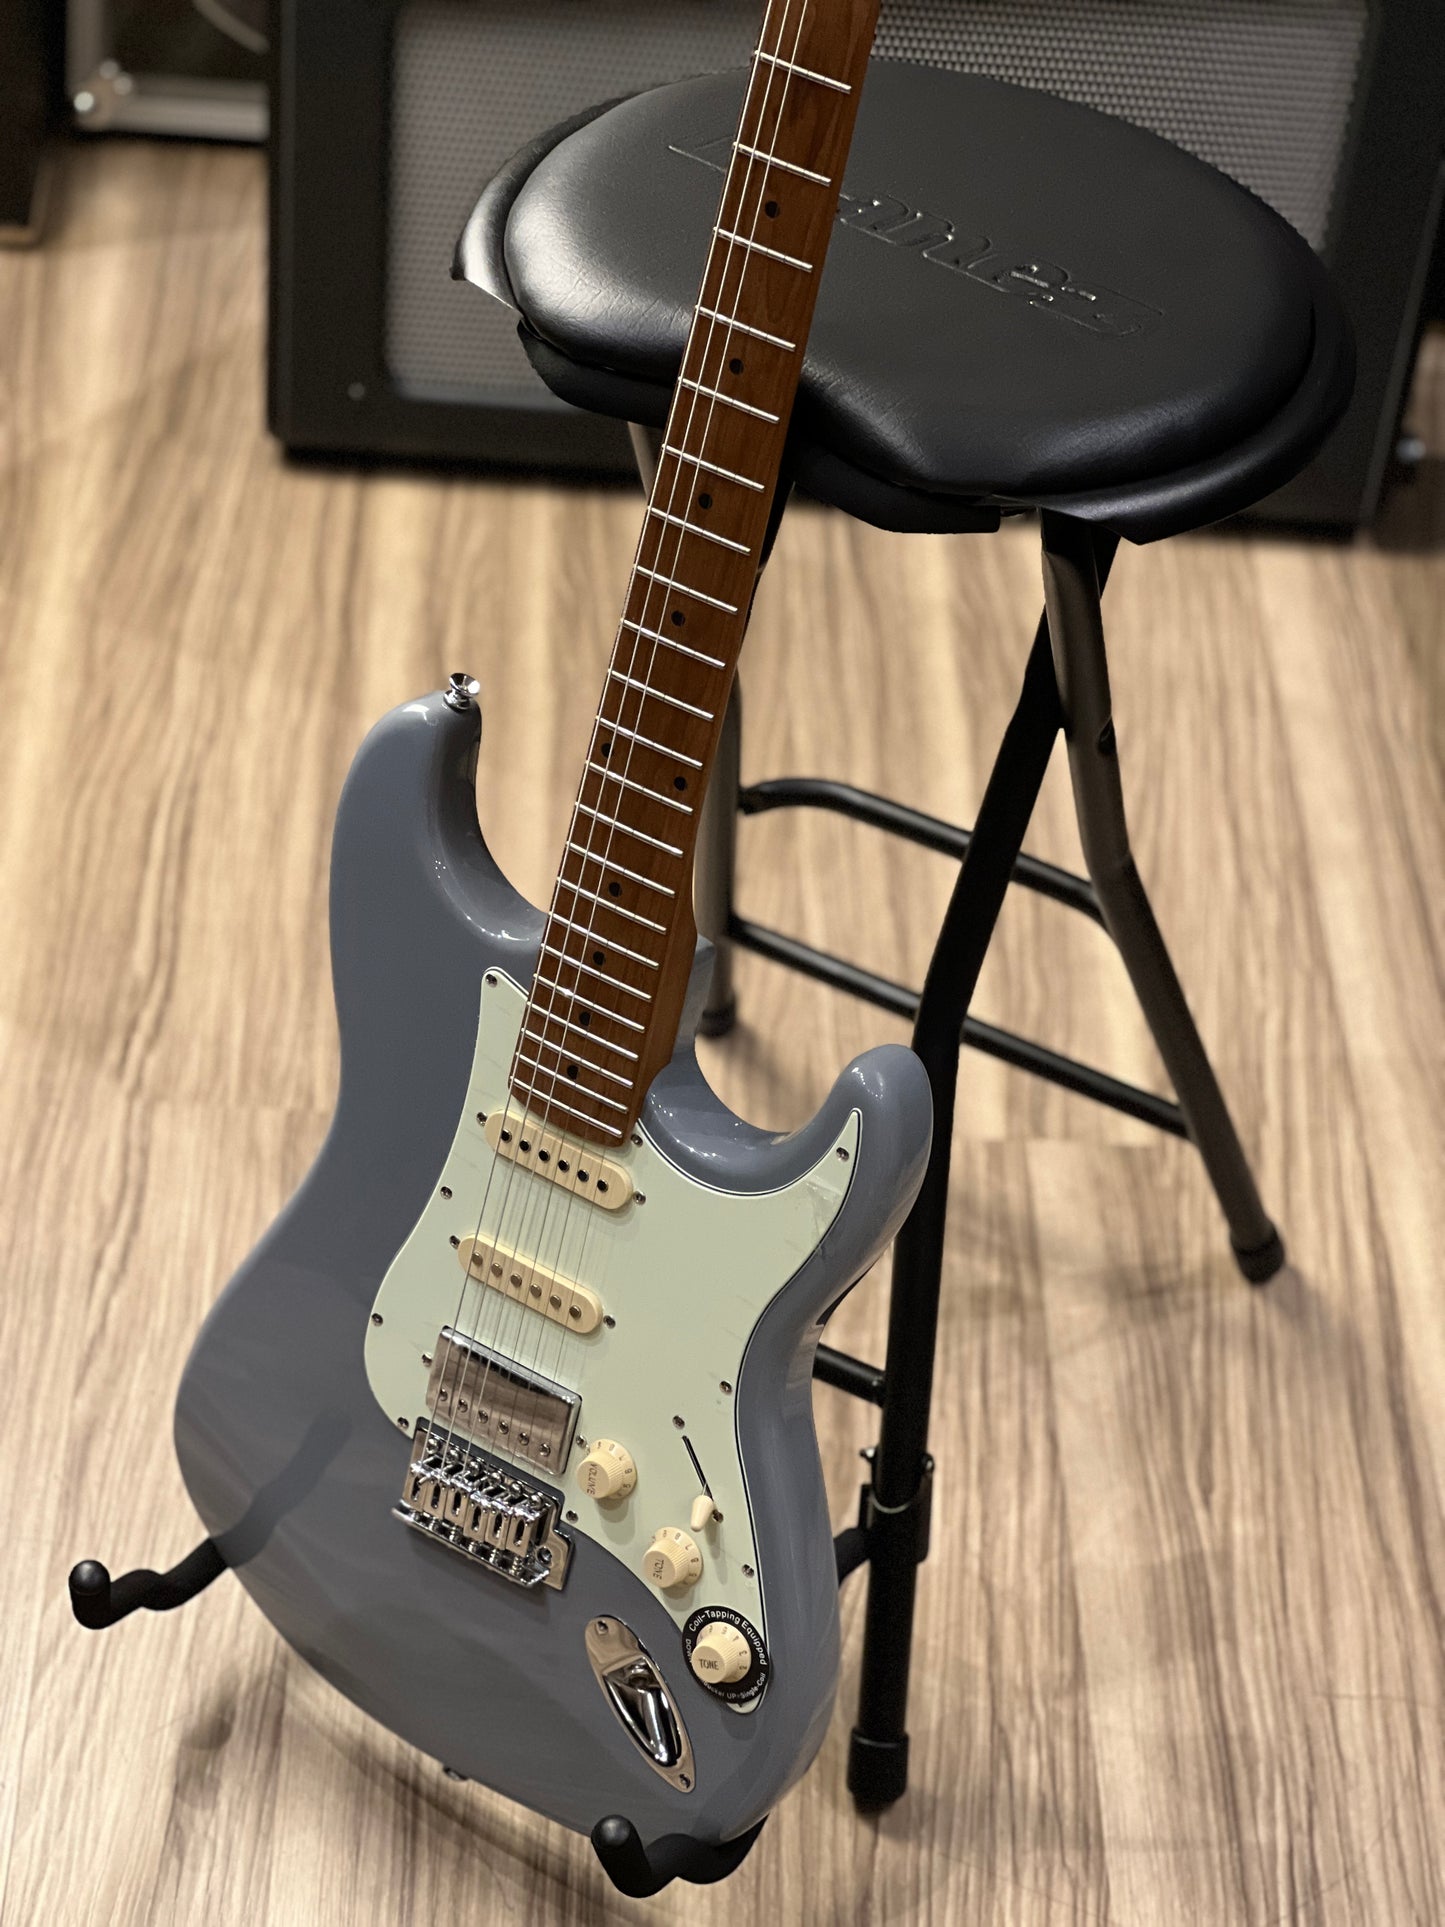 Ibanez IMC50FS Guitarist Throne Guitar Chair and Stand